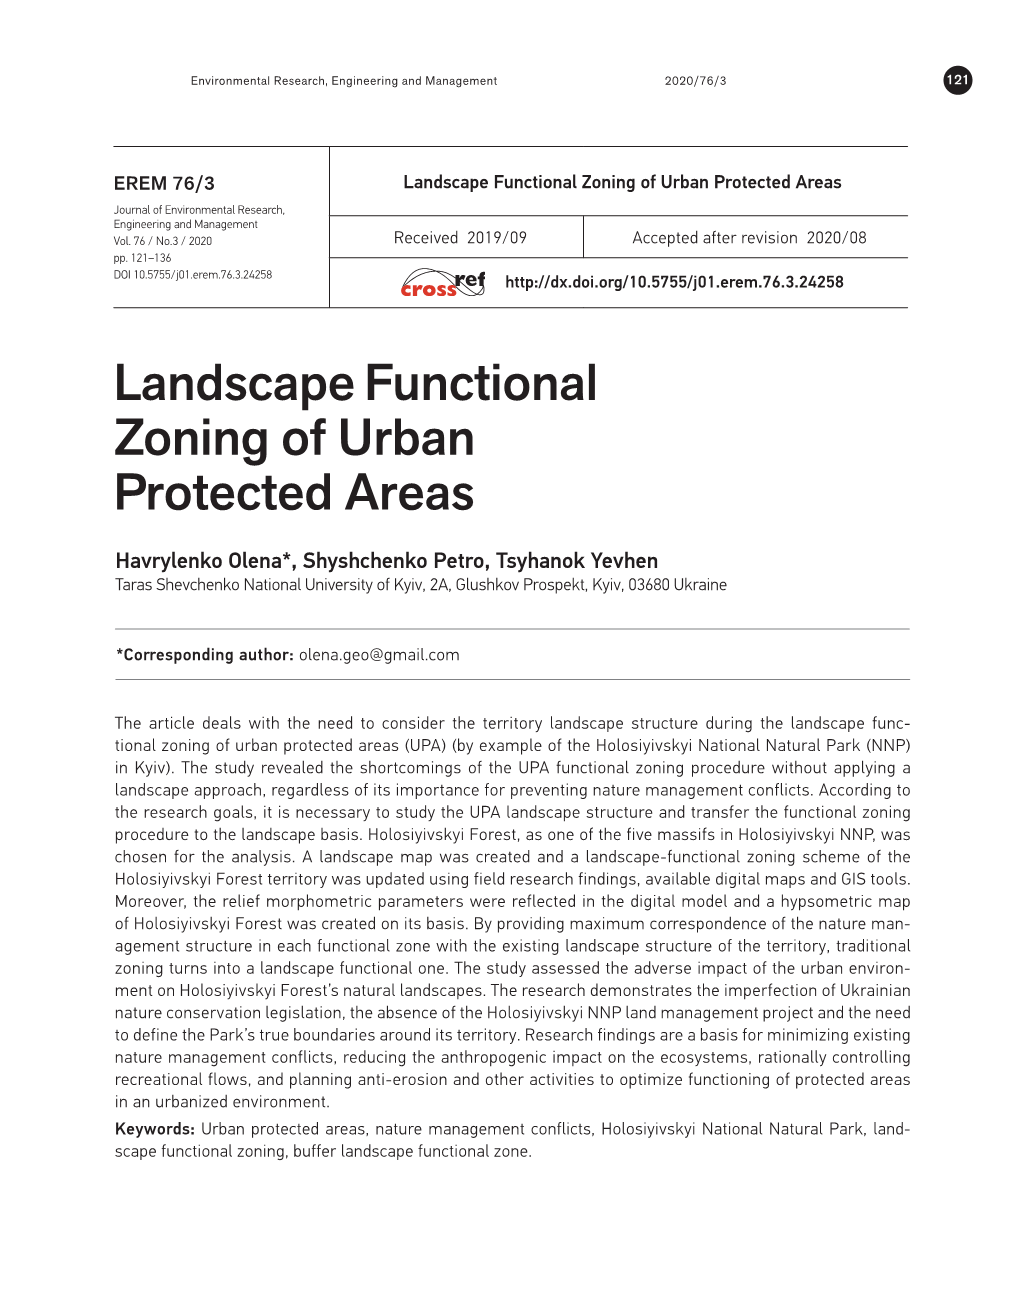 Landscape Functional Zoning of Urban Protected Areas Journal of Environmental Research, Engineering and Management Vol